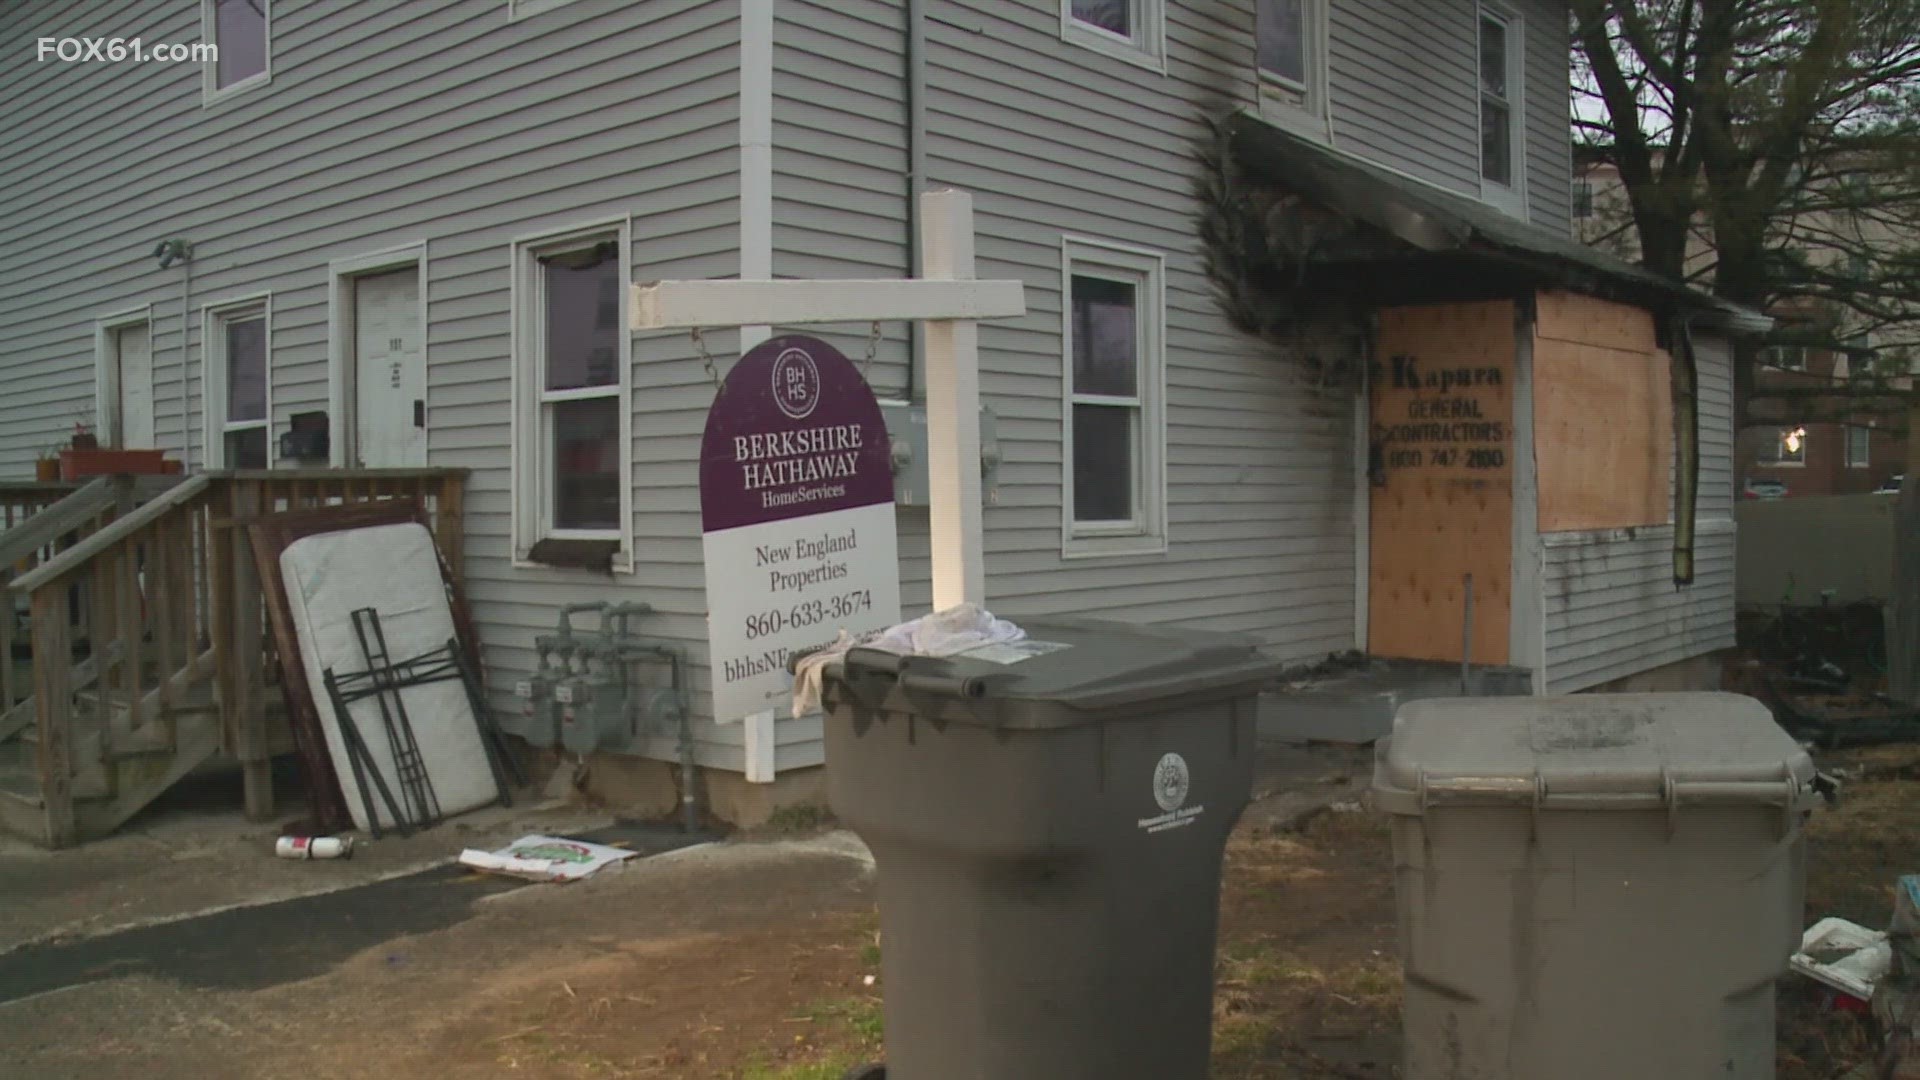 The fire happened overnight at a home on School Street in Bristol.